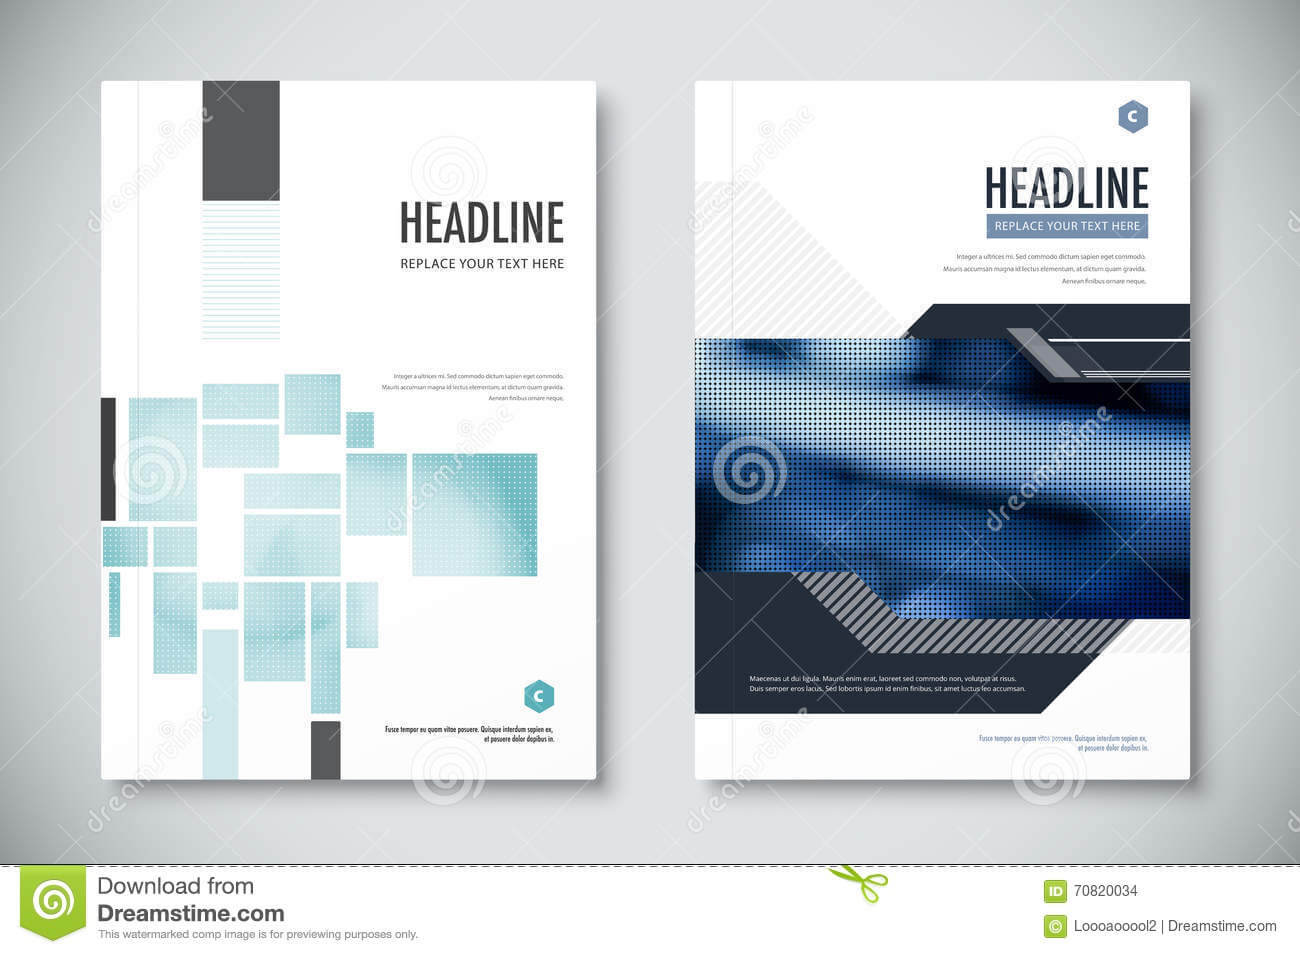 Business Report Design Template Free Html Annual Cover Word Intended For Cognos Report Design Document Template